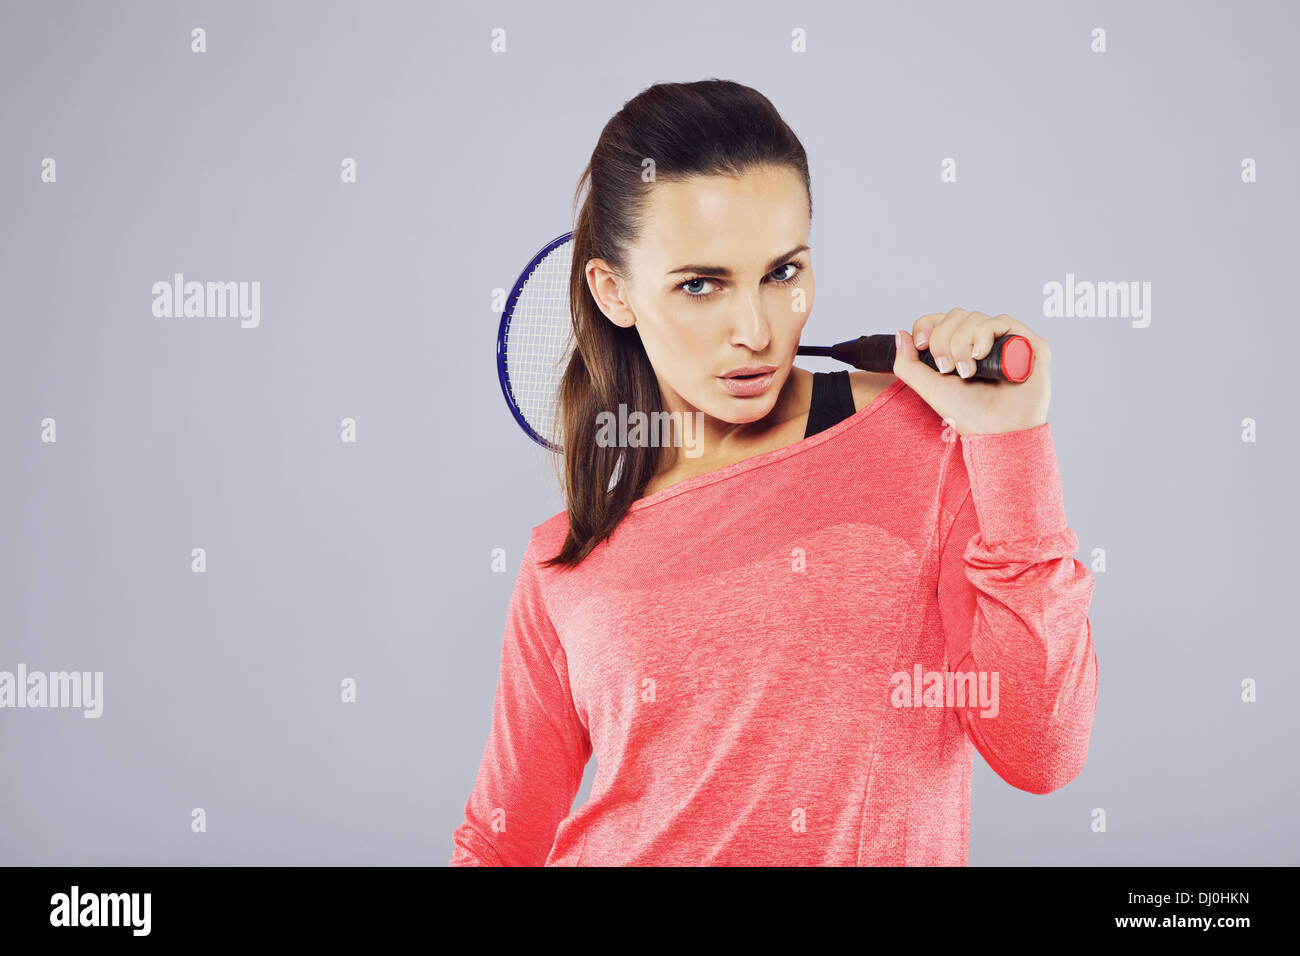 Portrait of pretty young girl holding a badminton racket looking at camera against grey background. Stock Photo